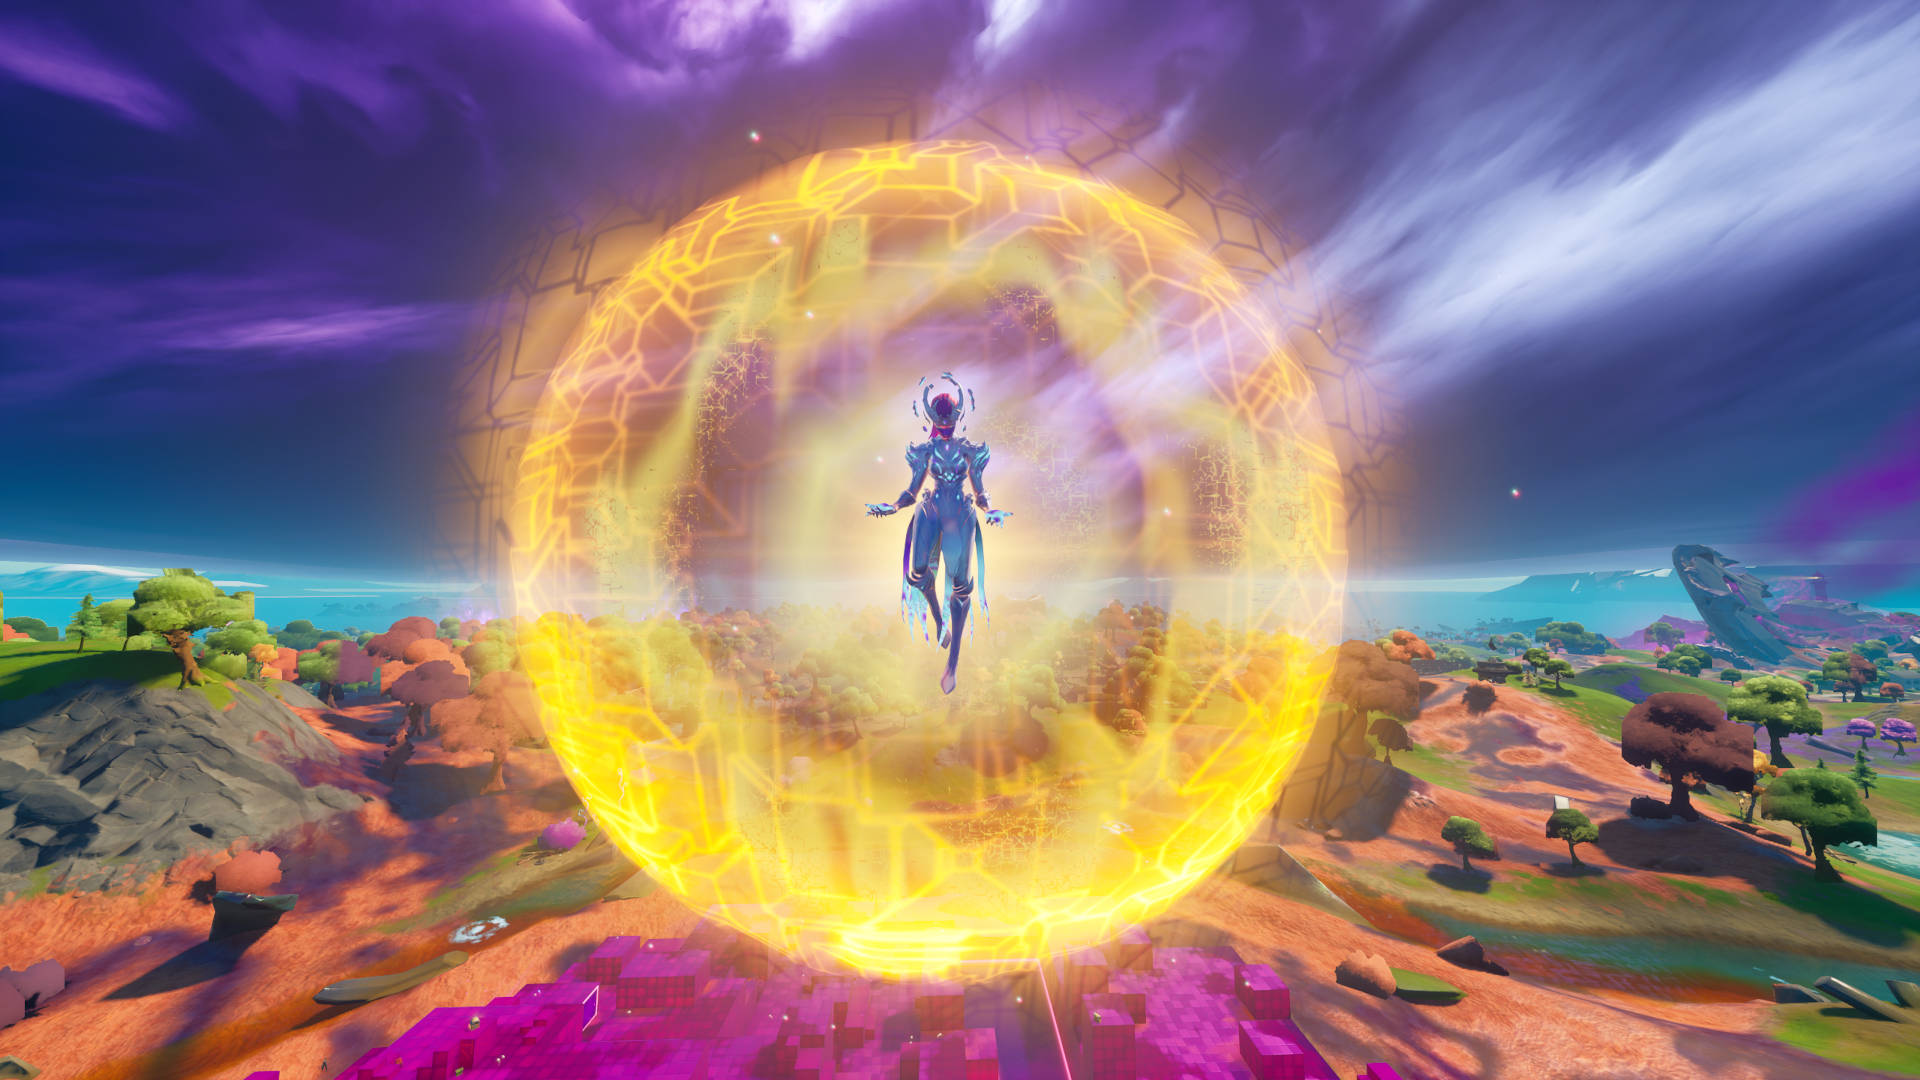 How To Get The Cube Queen Skin In Fortnite Galerie Lachenaud